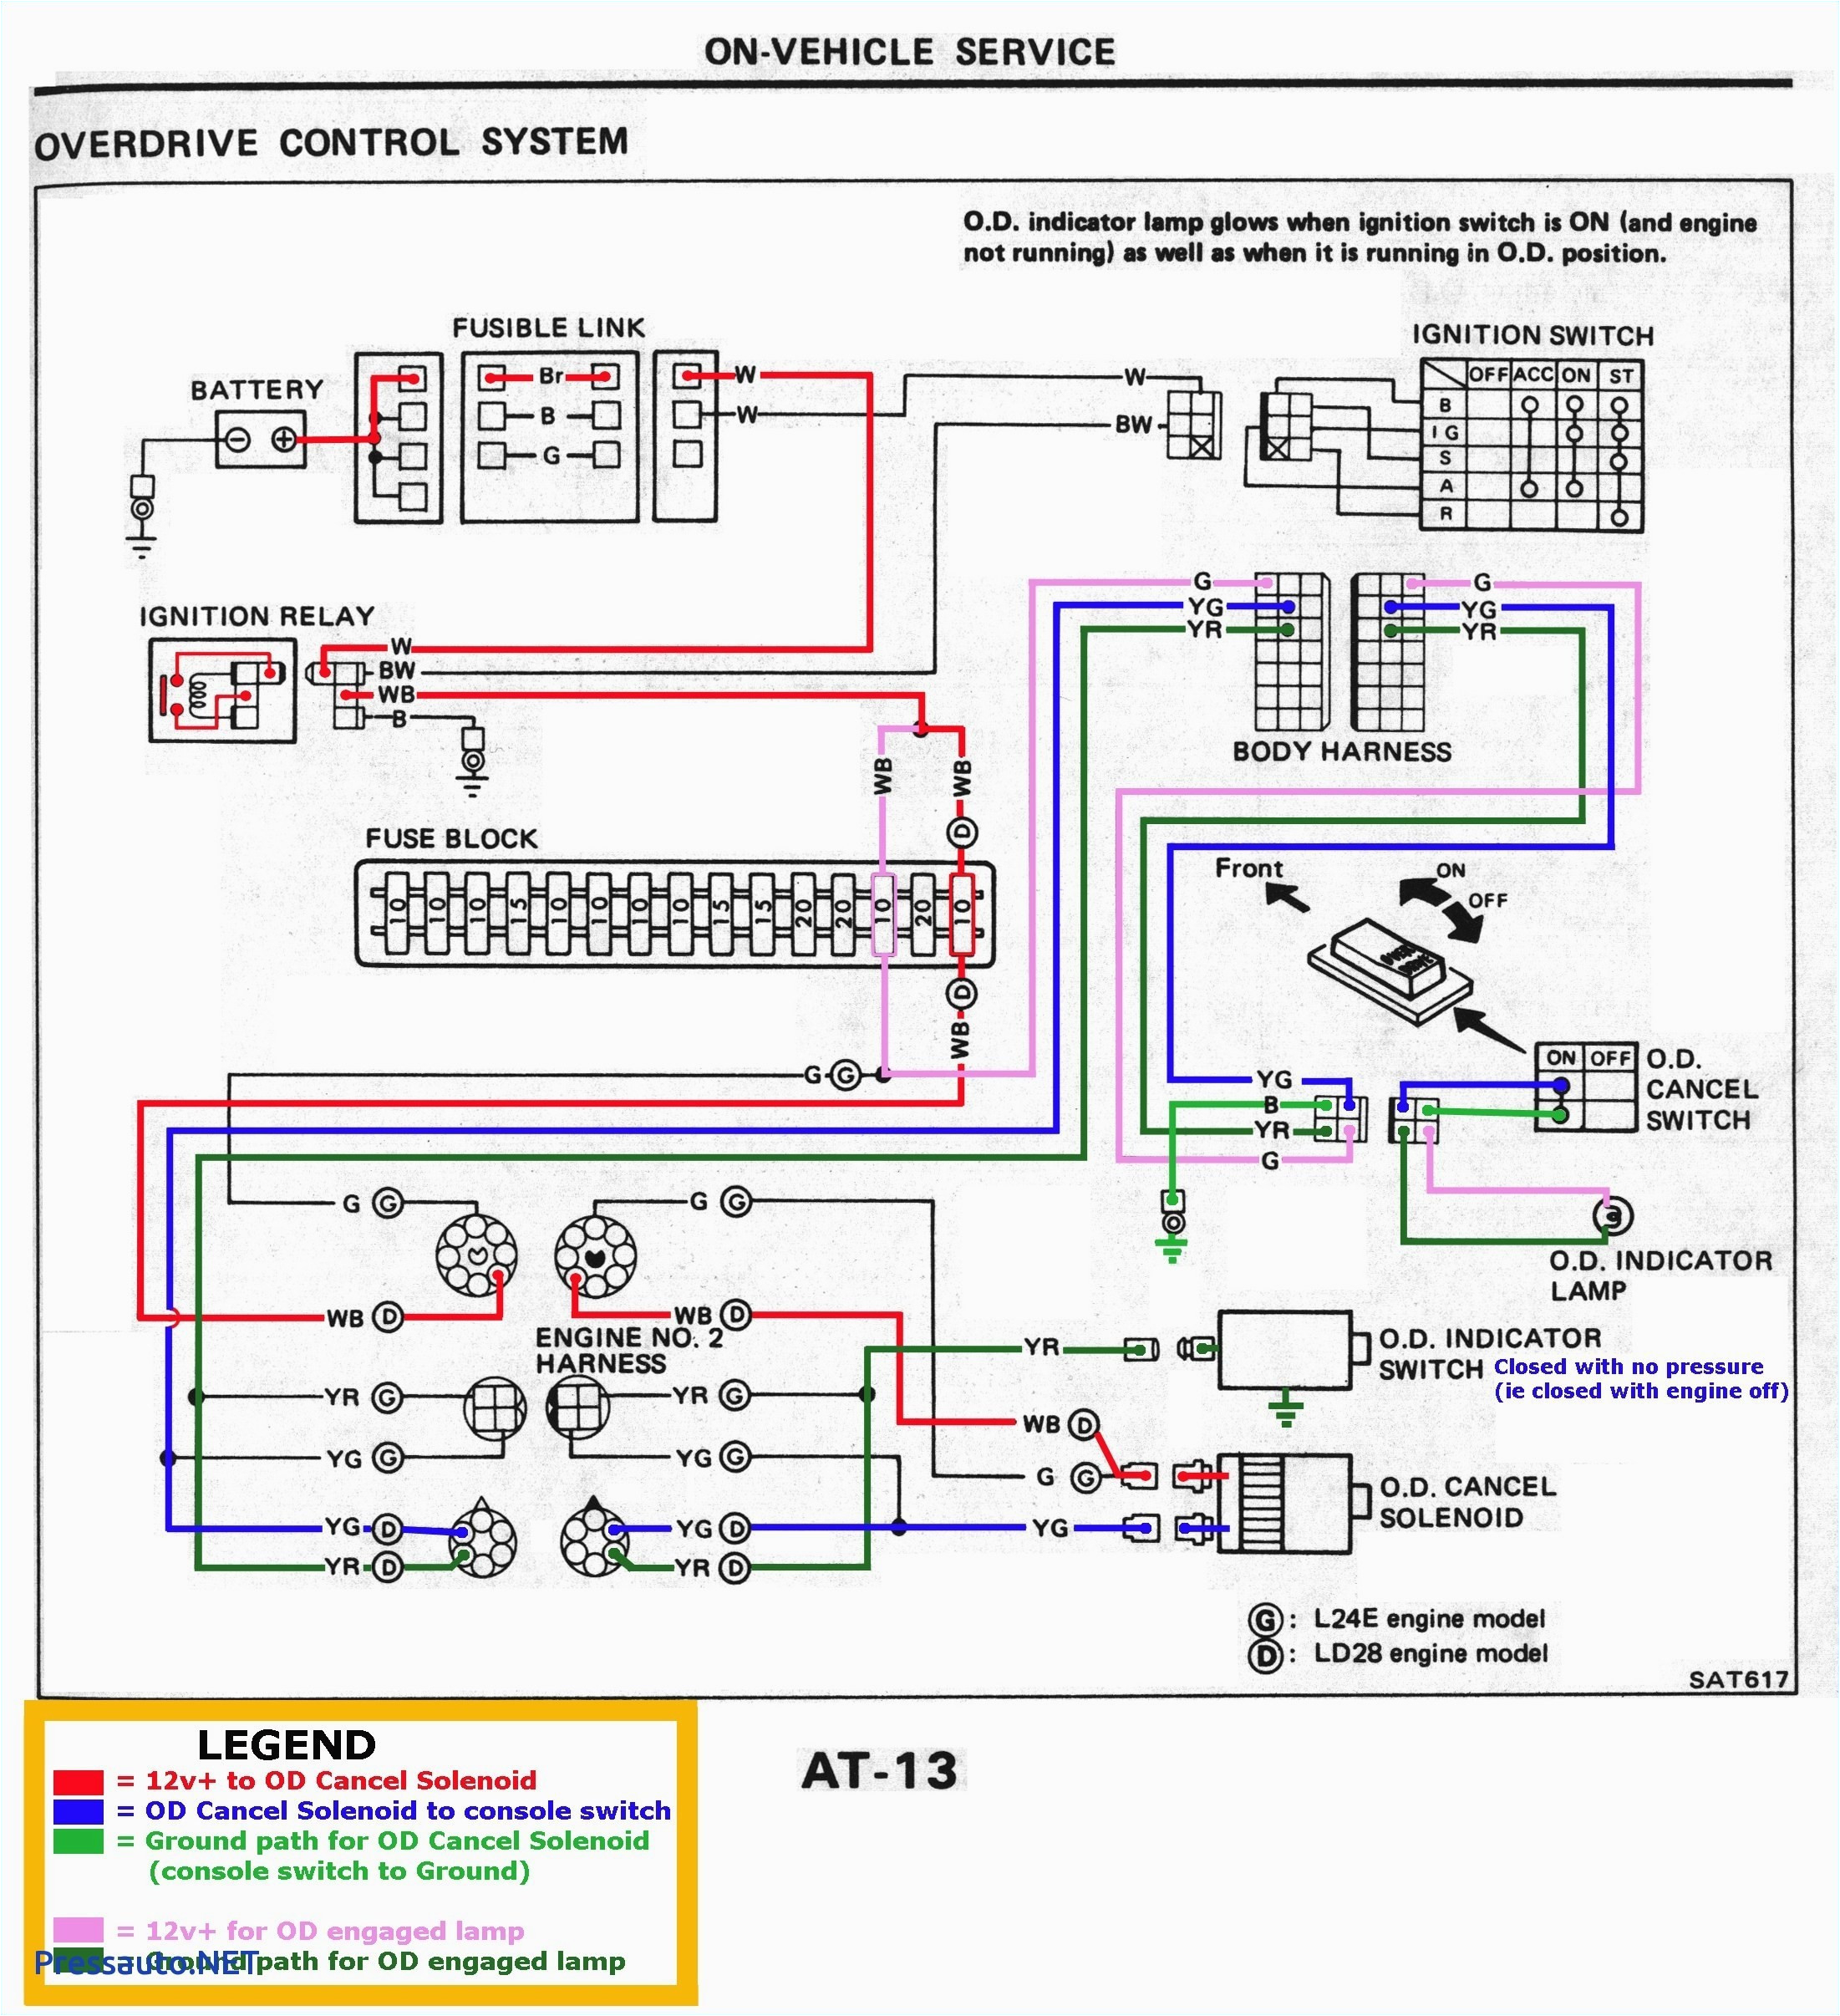 wiring schematic for hp computers wiring diagram inside 3 hp wiring diagram hp wiring diagram